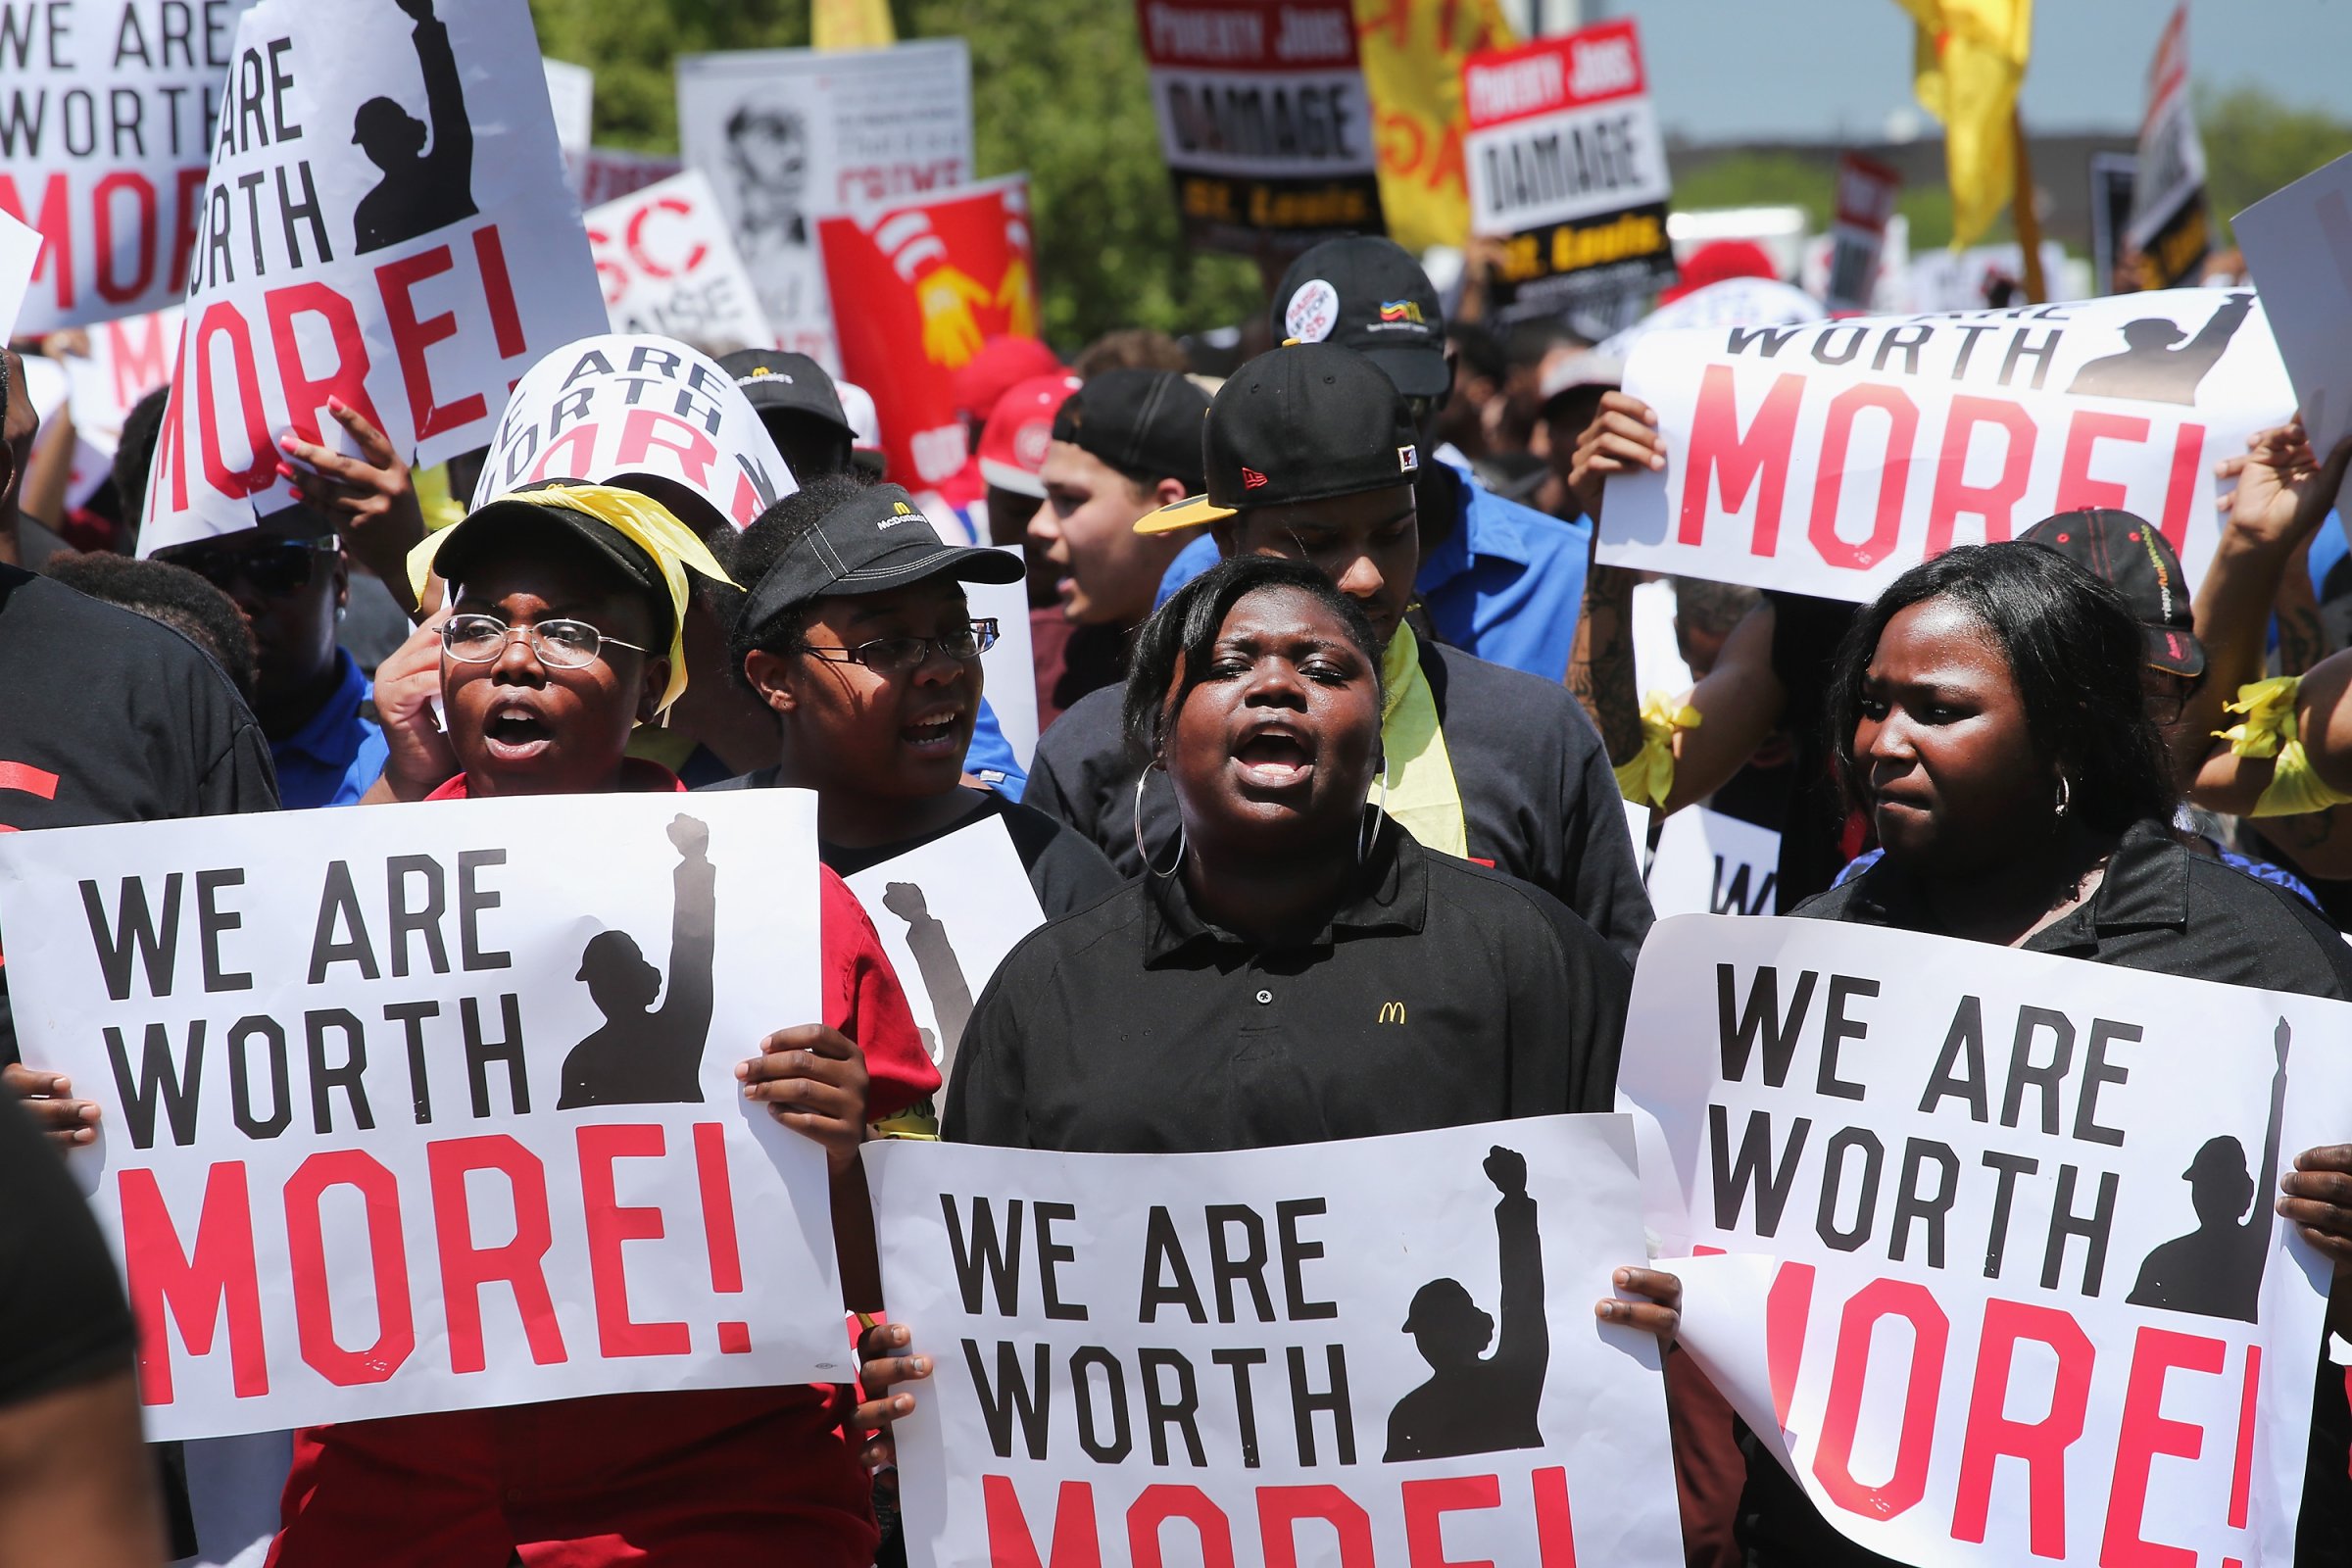 Fast Food Workers Protest For Increased Wages Ahead Of McDonald's Annual Shareholder Meeting